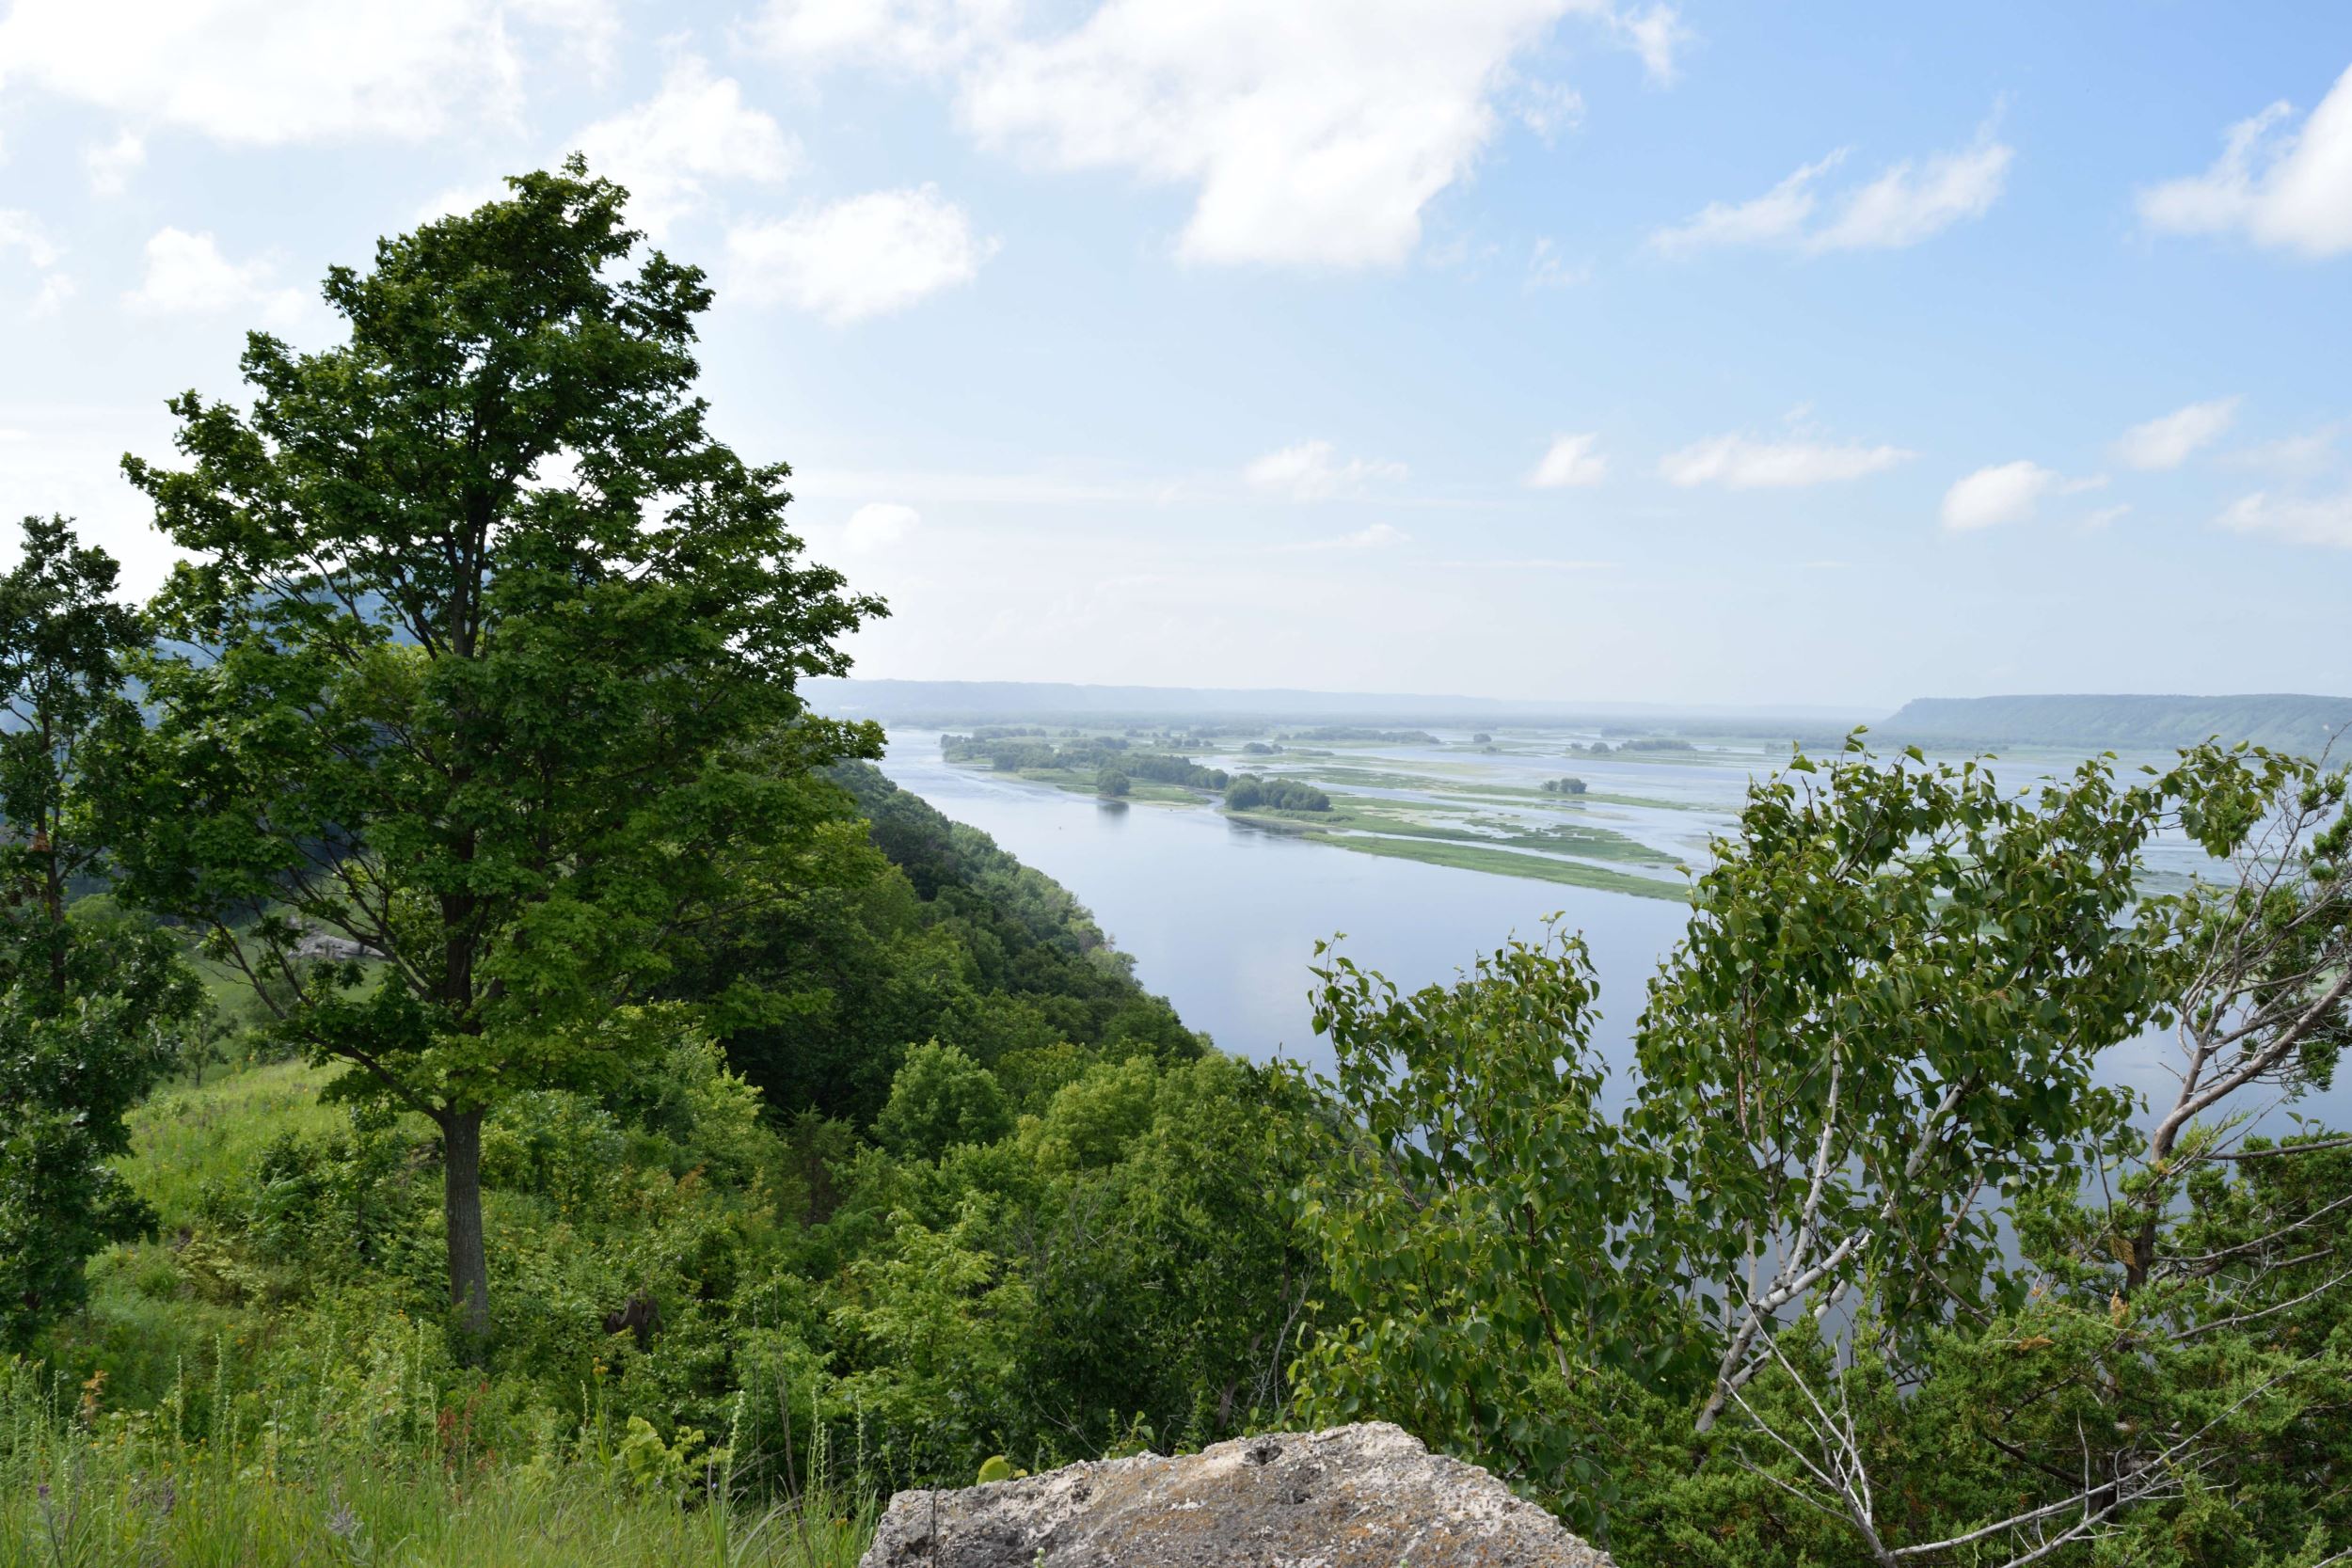 Capoli Bluff on the Mississippi river is part of the Buckmaster easement